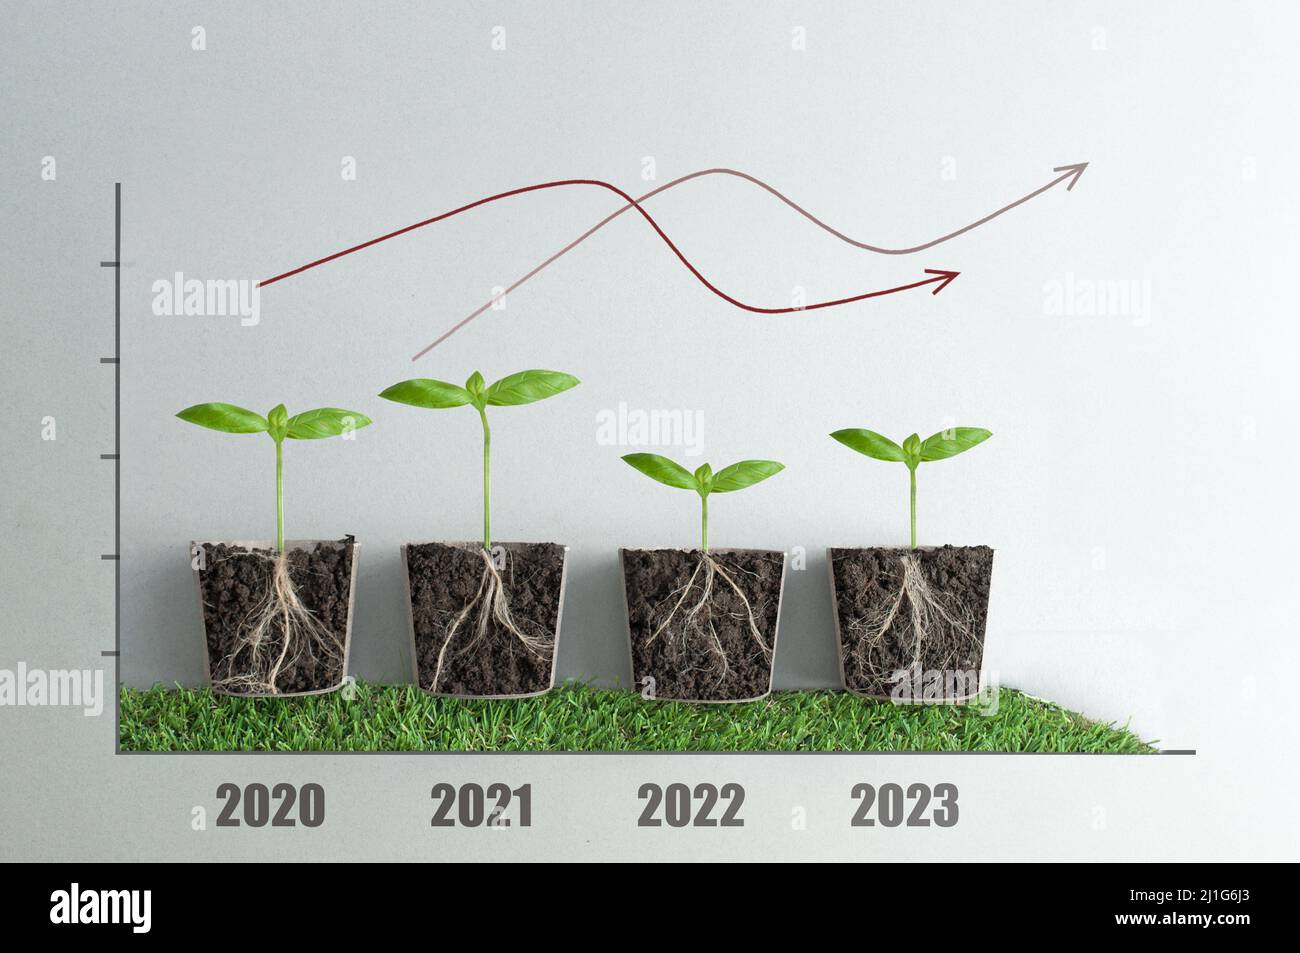 Business recovery stages line graph, with seedlings and roots exposed from 2020 to 2023 Stock Photo